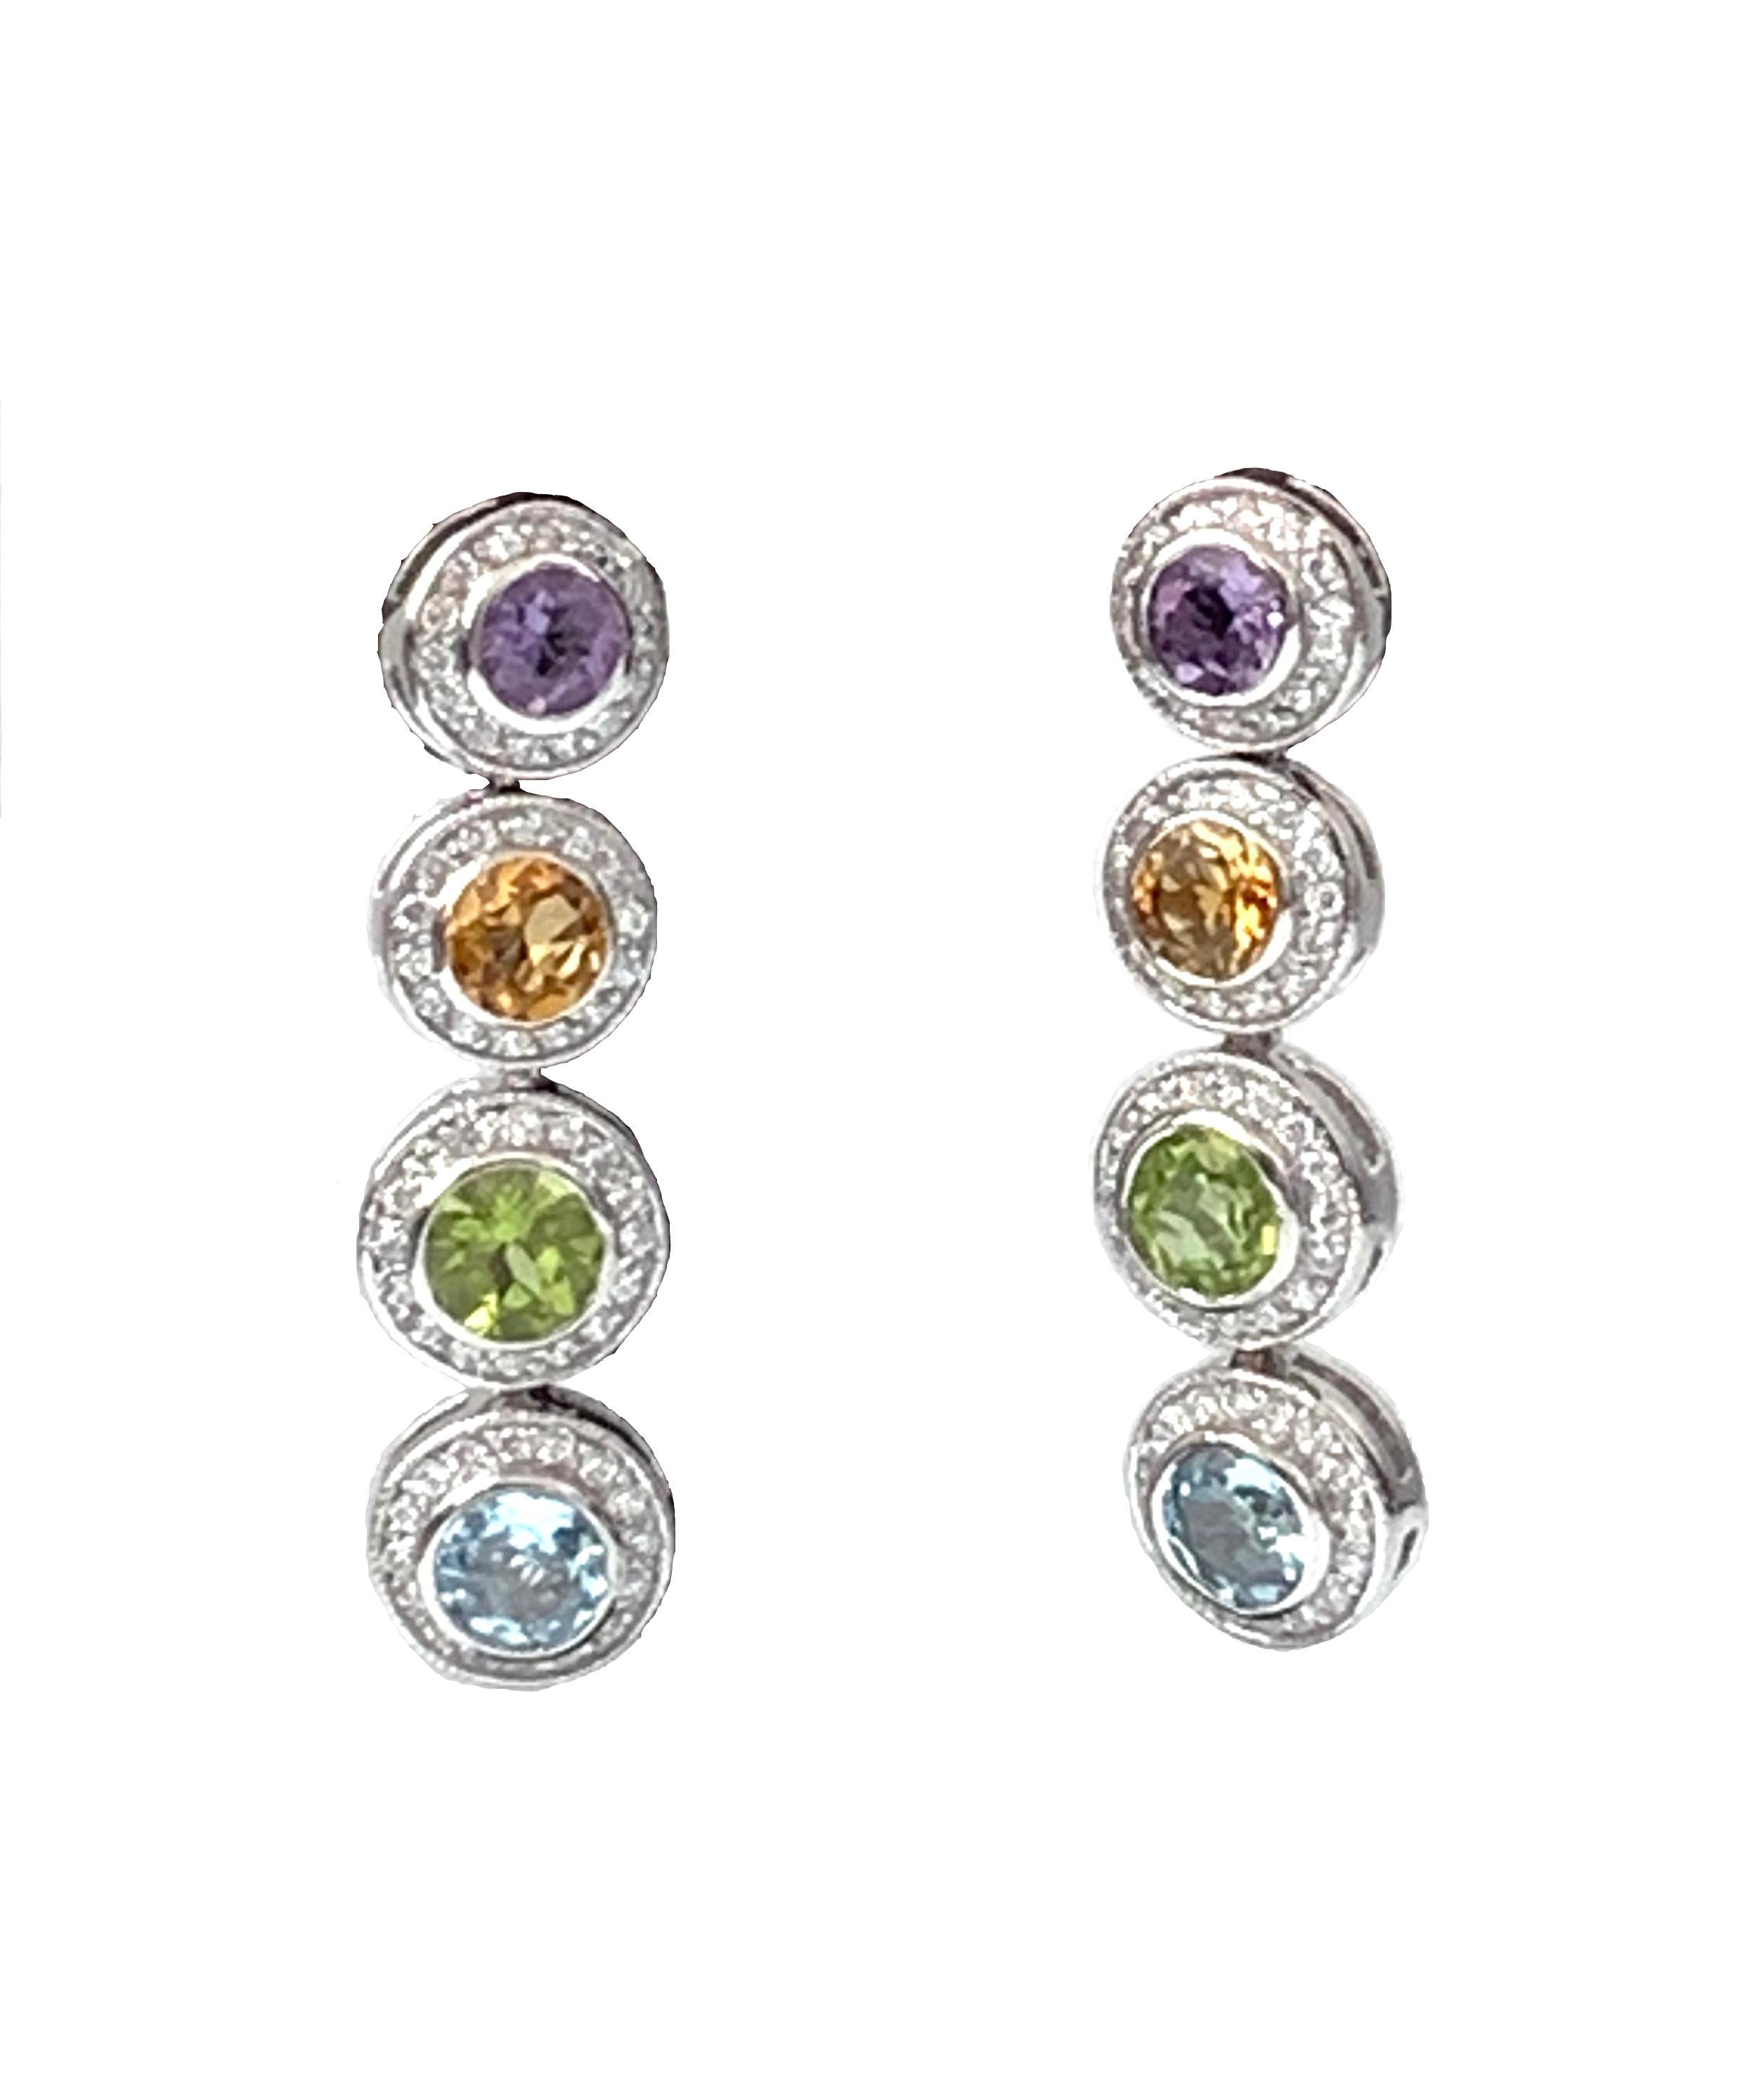 Beautiful multicolor gemstones (Amethyst, Citrine, Blue Topaz, and Peridot) adorned with round Cubic Zirconia drop earrings. Platinum rhodium finished. Straight post. Marked: Jarin

1-3/4